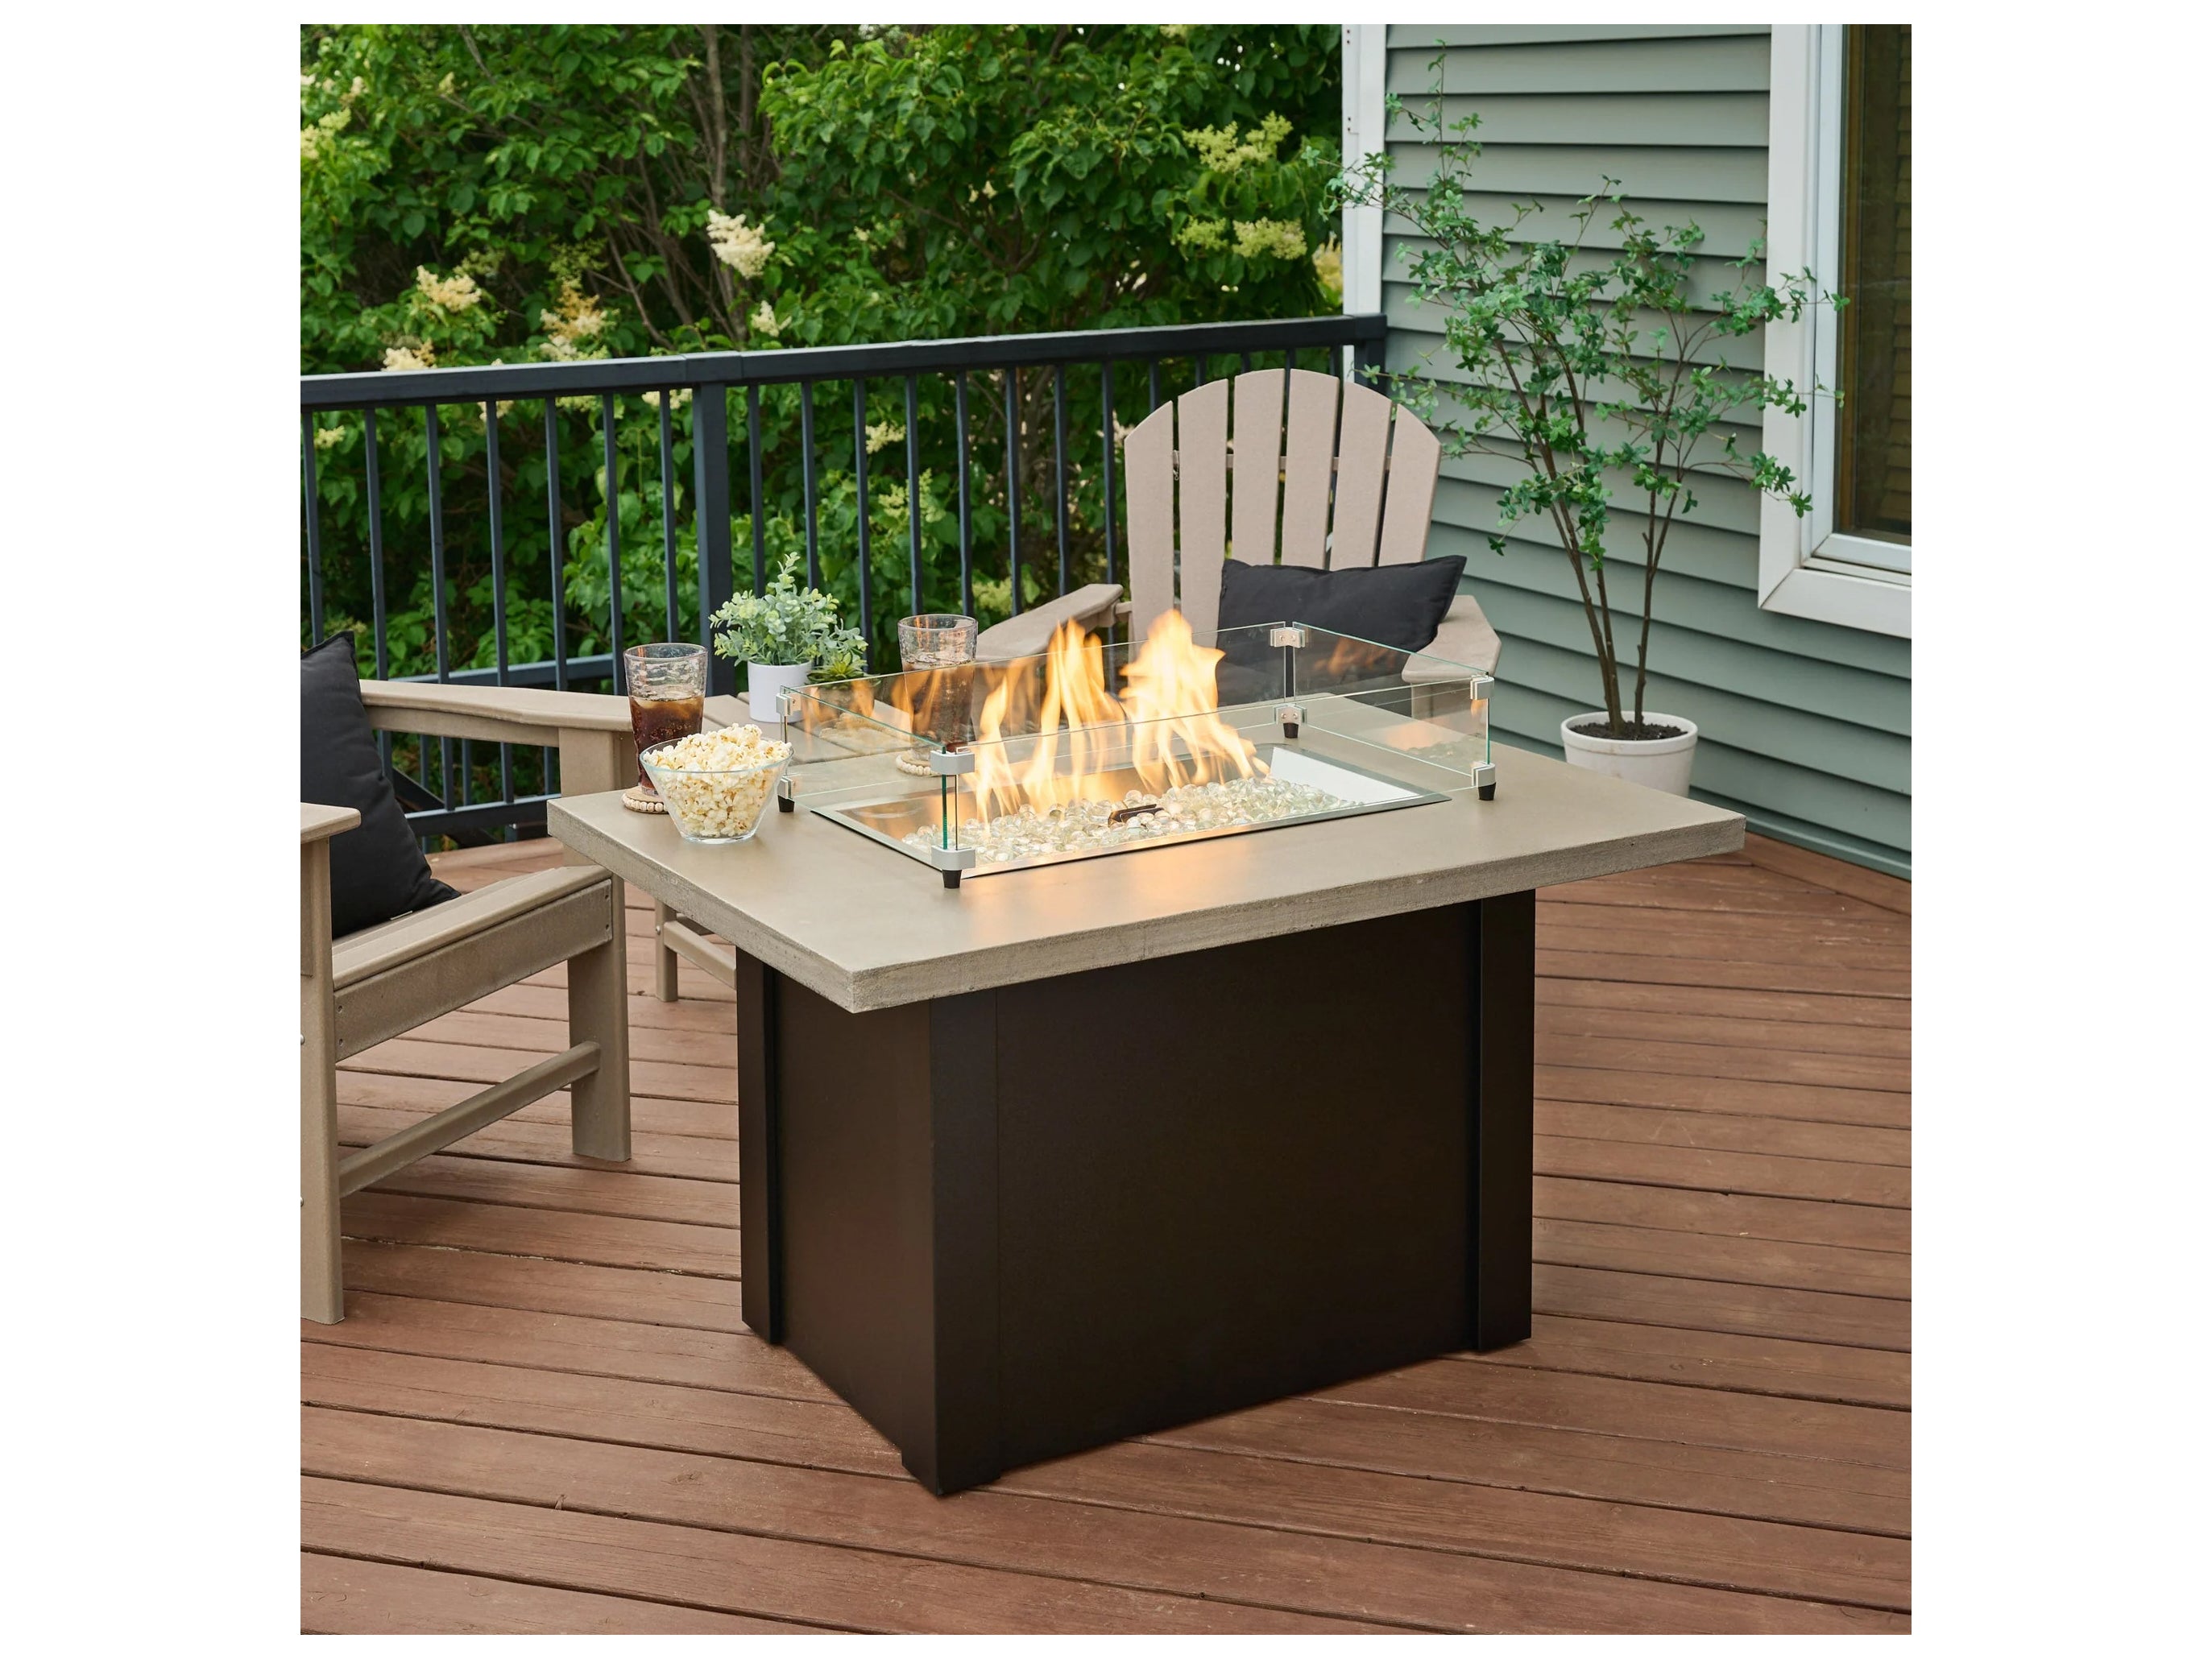 Outdoor Greatroom - 44’‘W x 30’'D - Havenwood Steel Luverne Black Rectangular Pebble Grey Everblend Top Gas Fire Pit Table